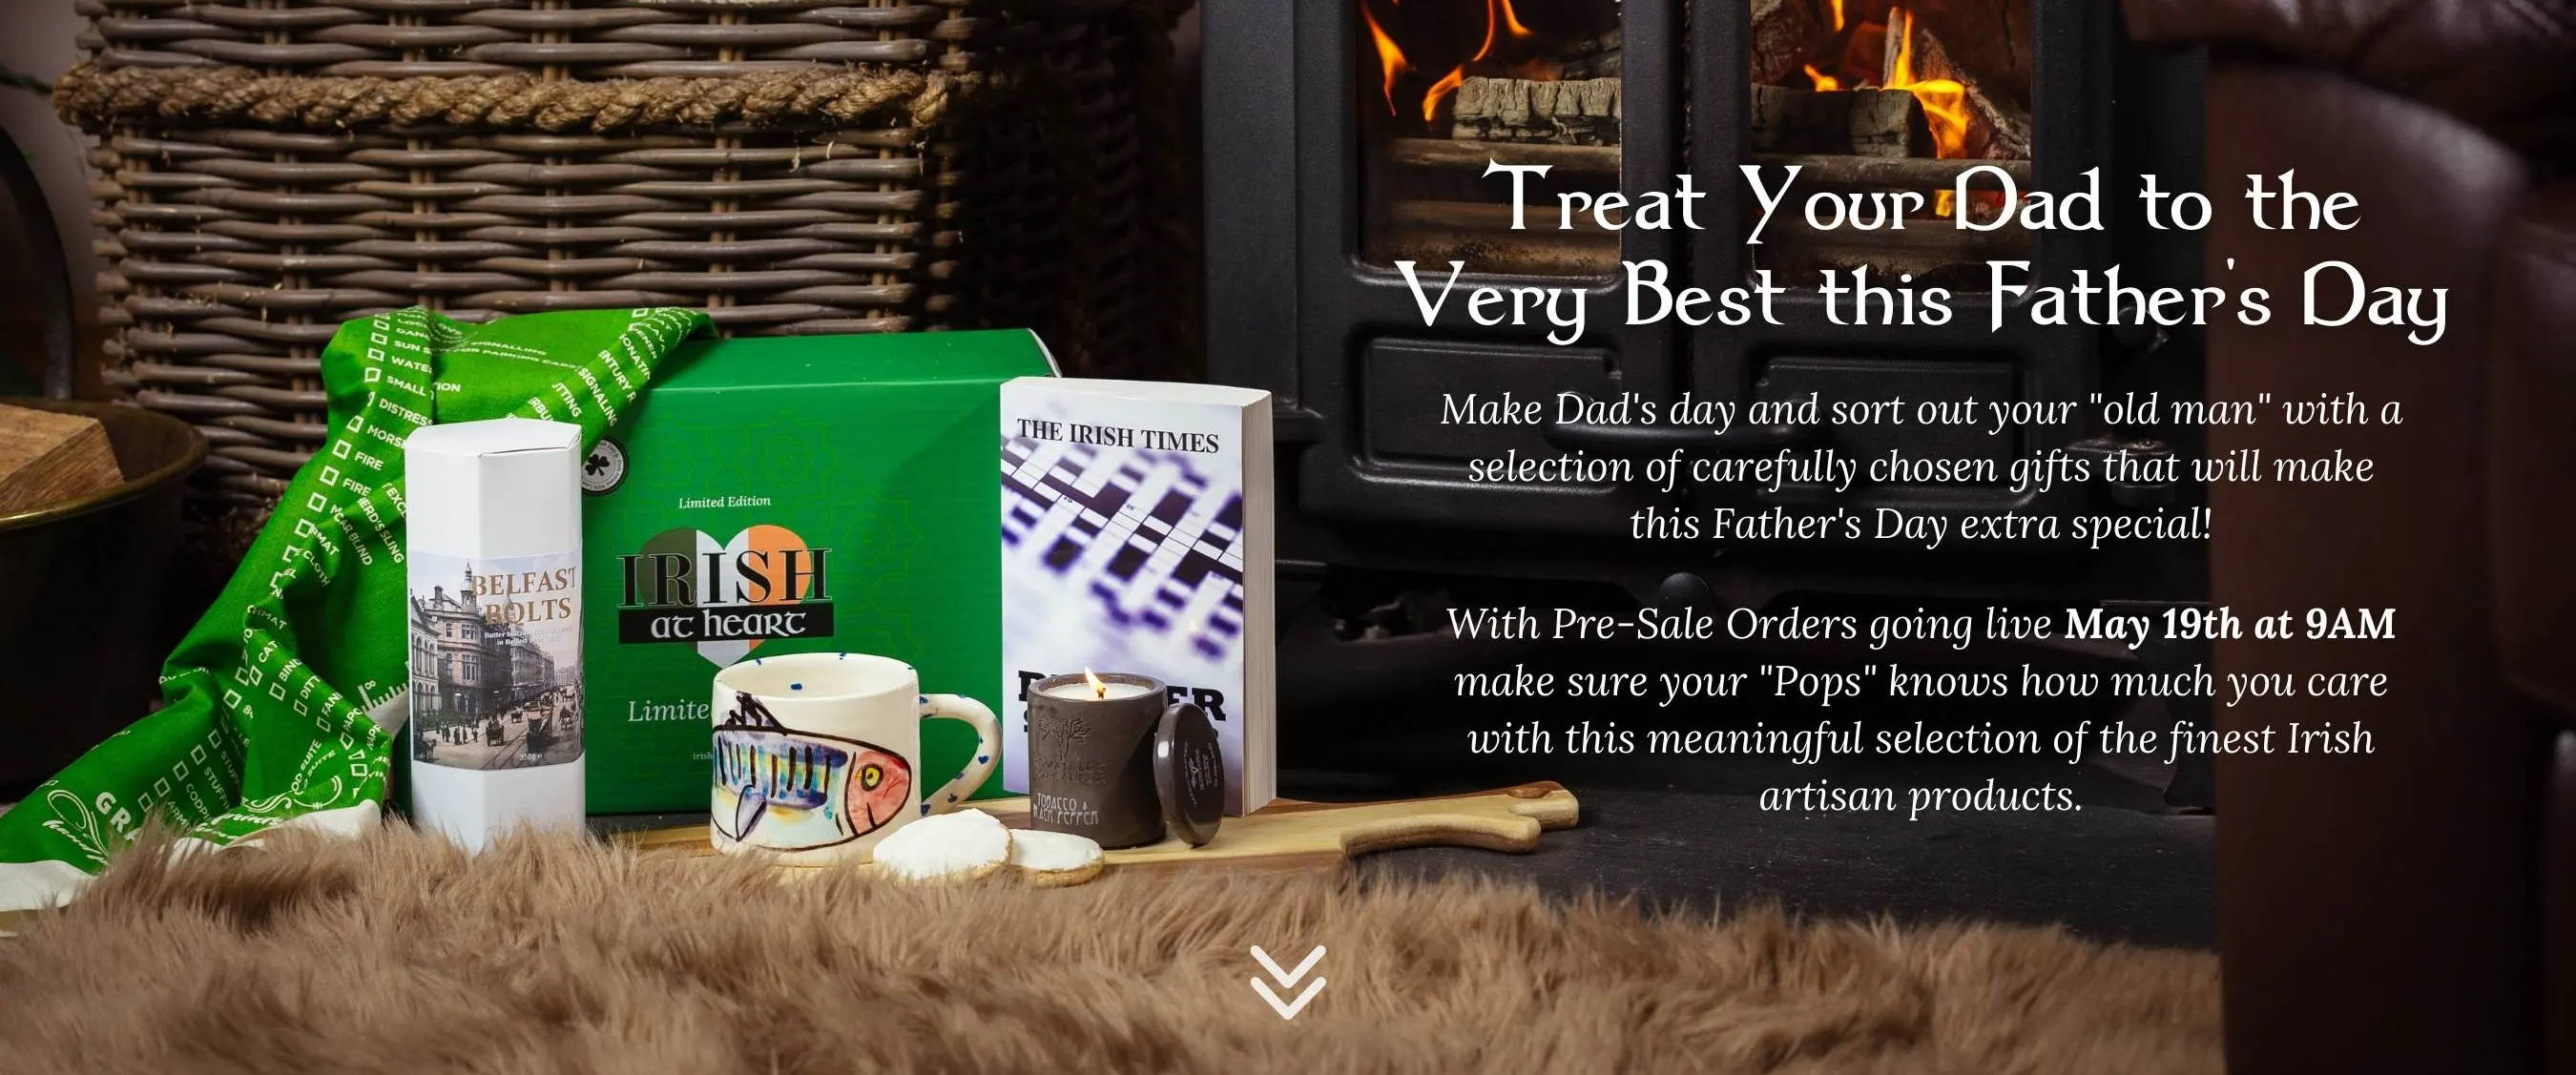 Fathers Day Limited Edition Gift box hero image from irish-at-heart.com